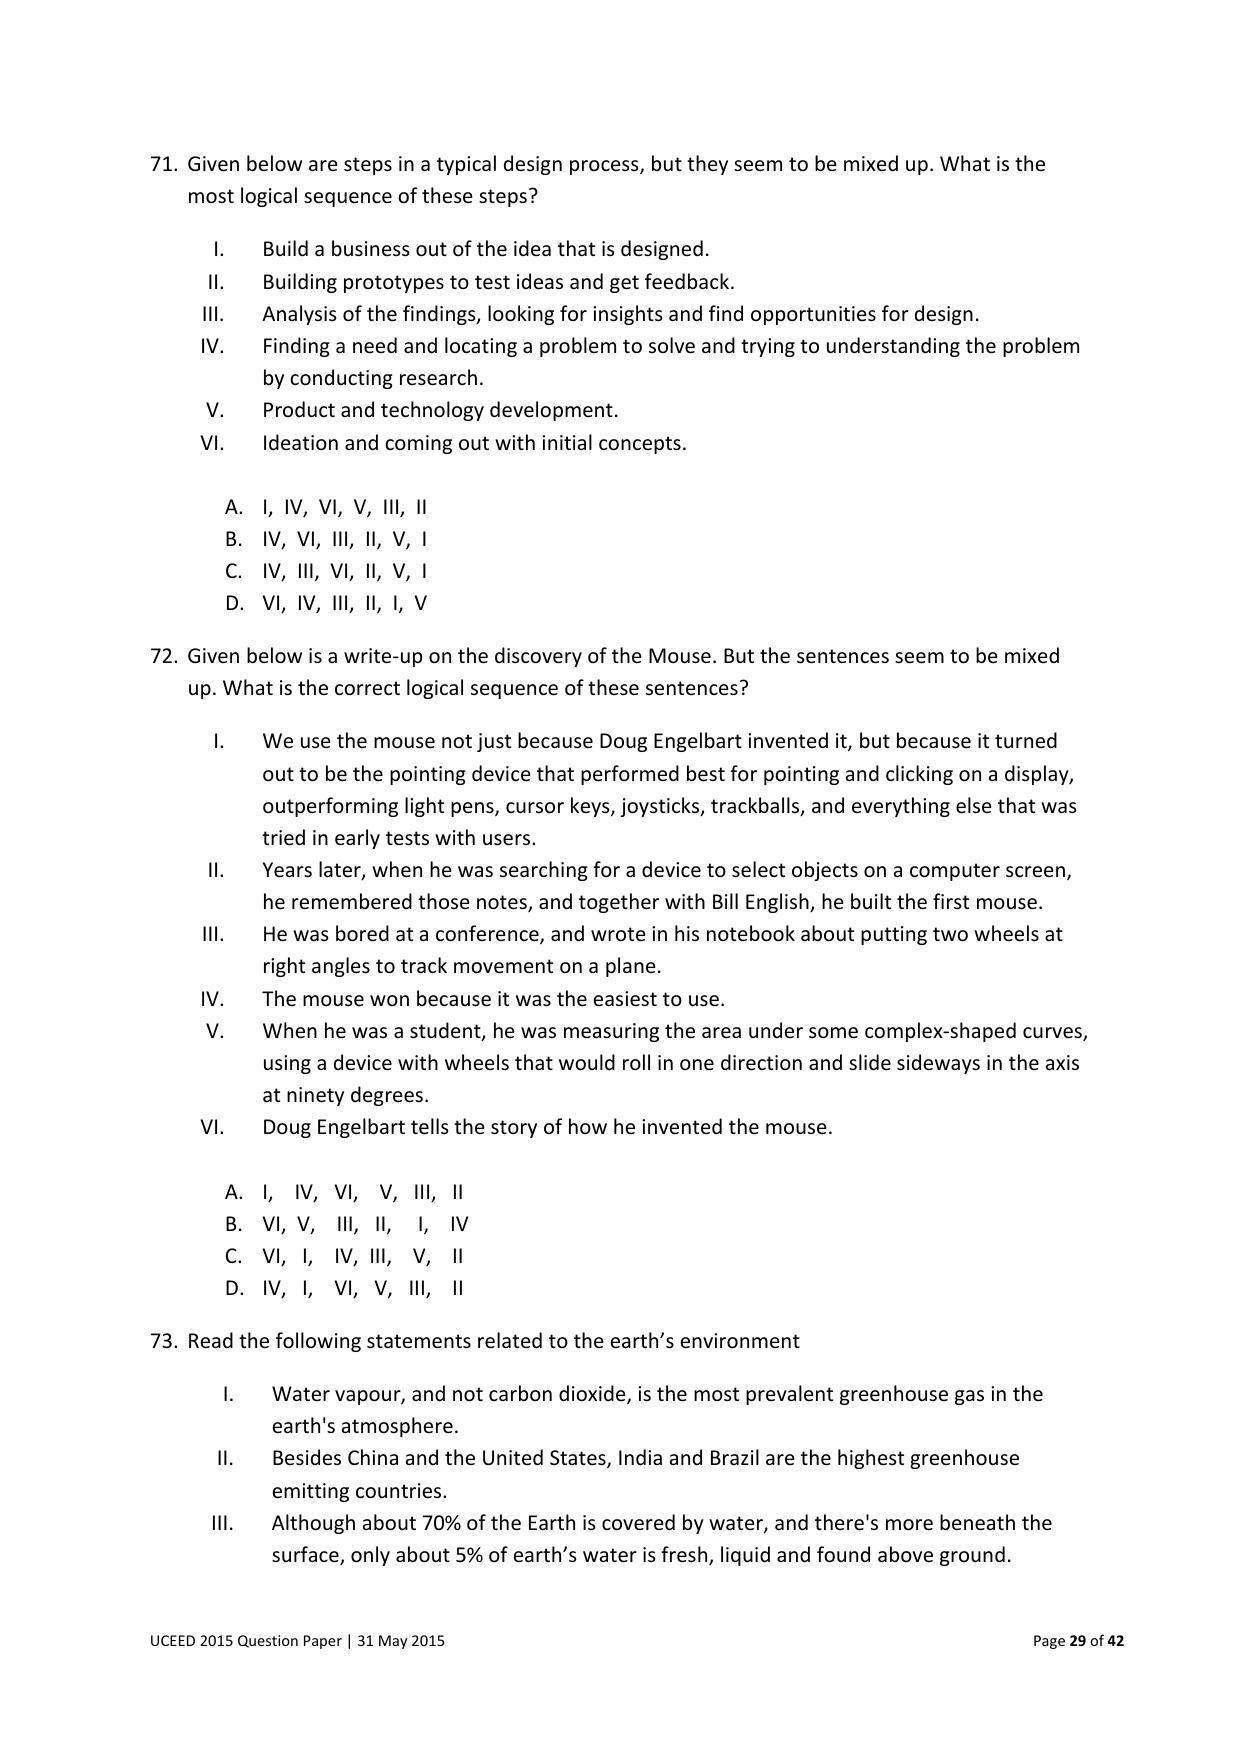 UCEED 2015 Question Paper - Page 29